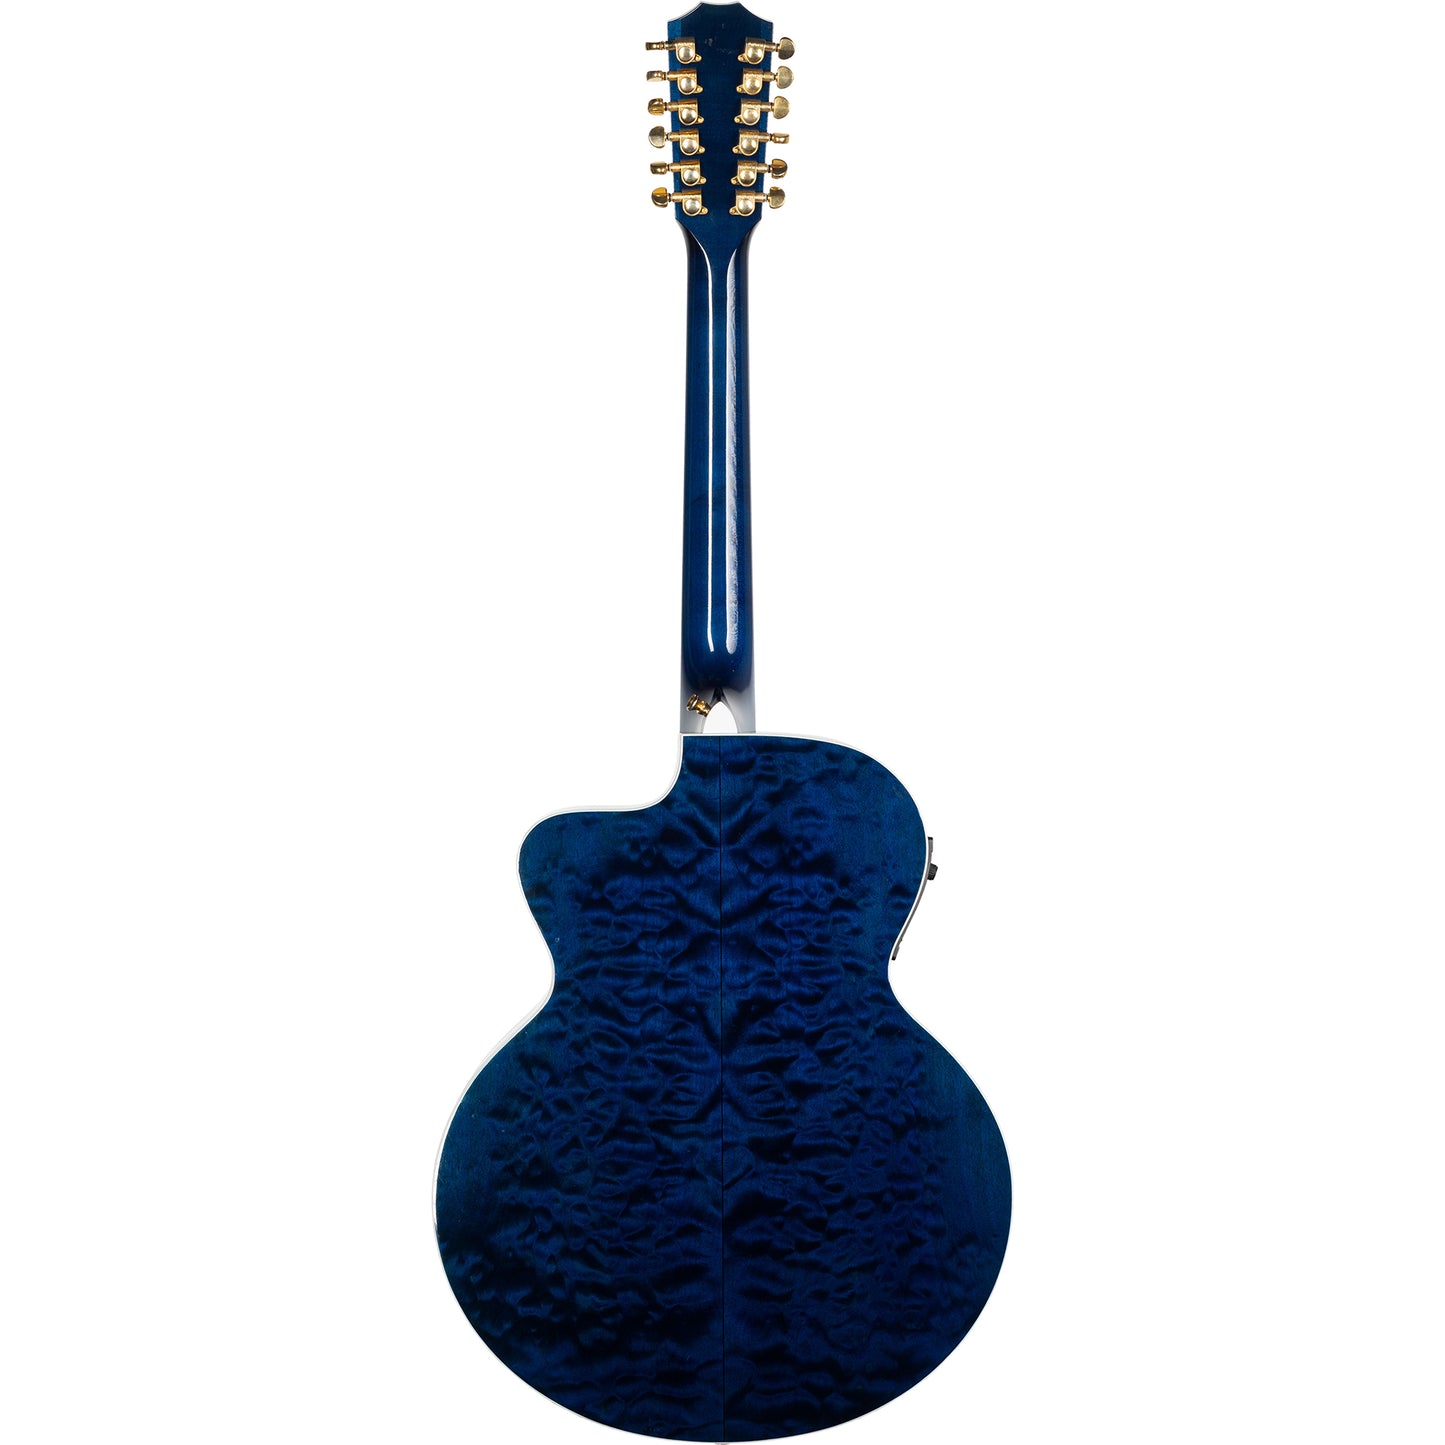 Taylor 655ce Limited Edition Acoustic Electric Guitar - Trans Blue